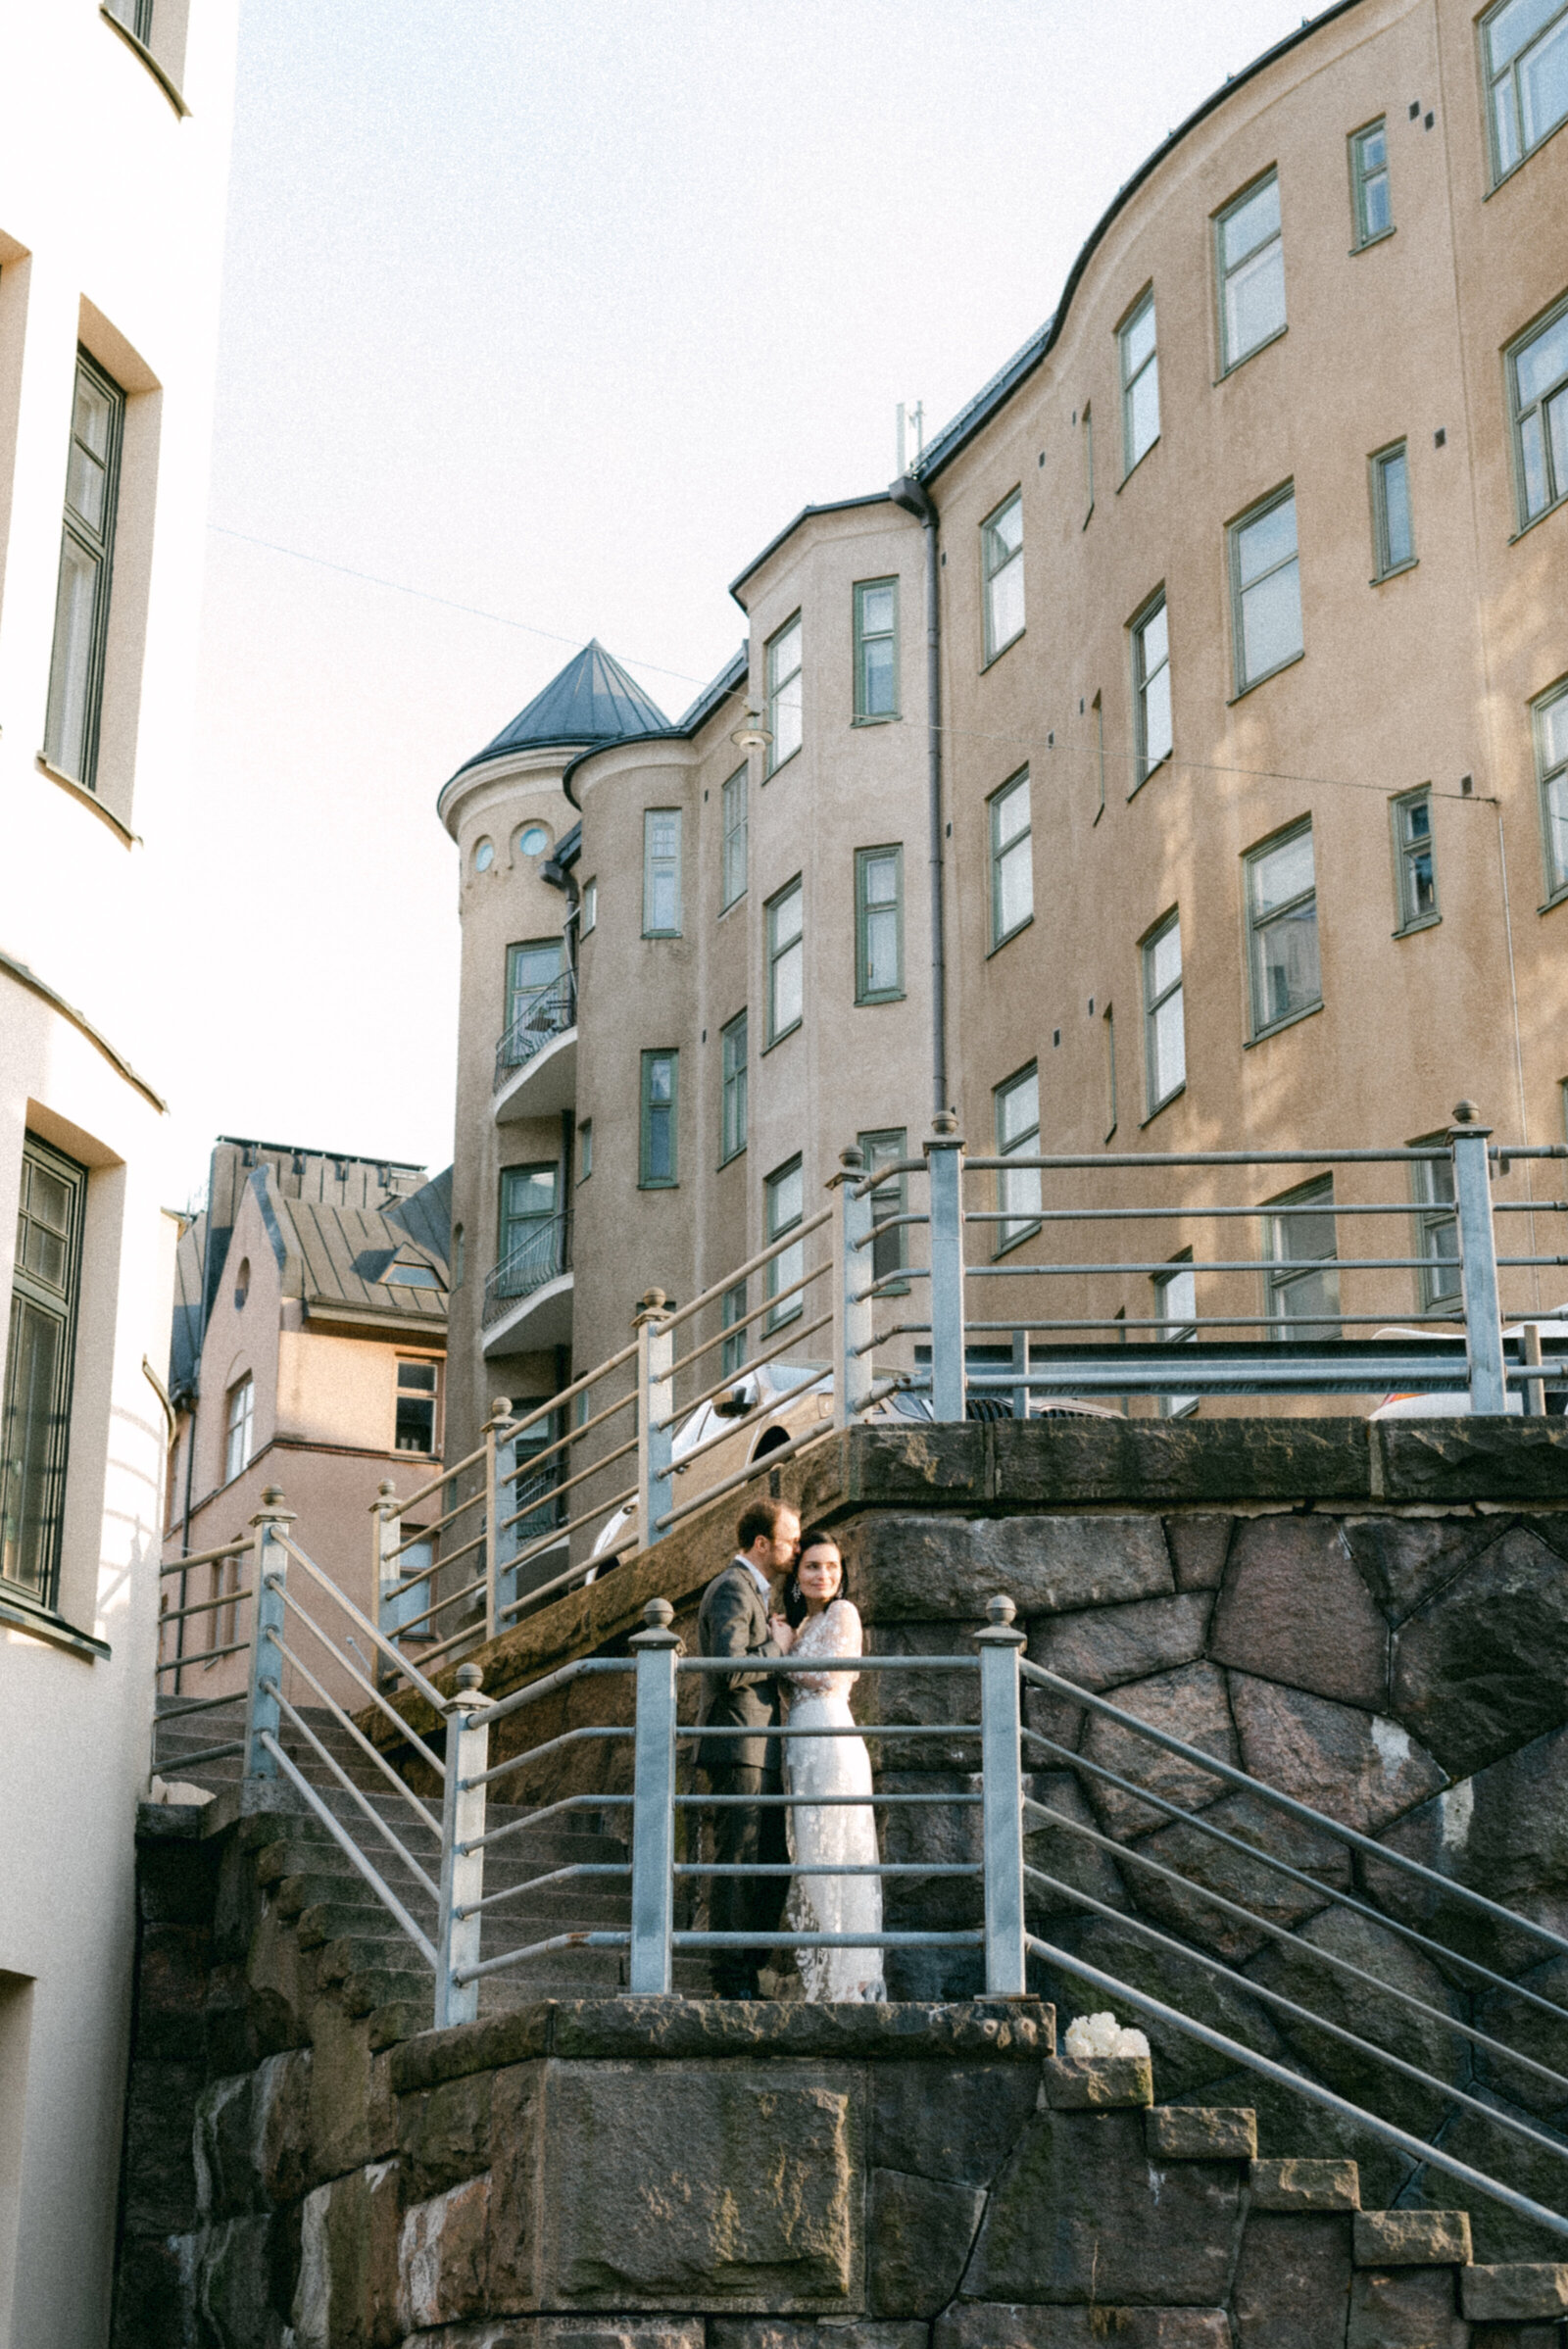 Wedding couple standing on the stairs in the city.  Nordic elopement wedding photographer Hannika Gabrielsson photographed the couple in spring.